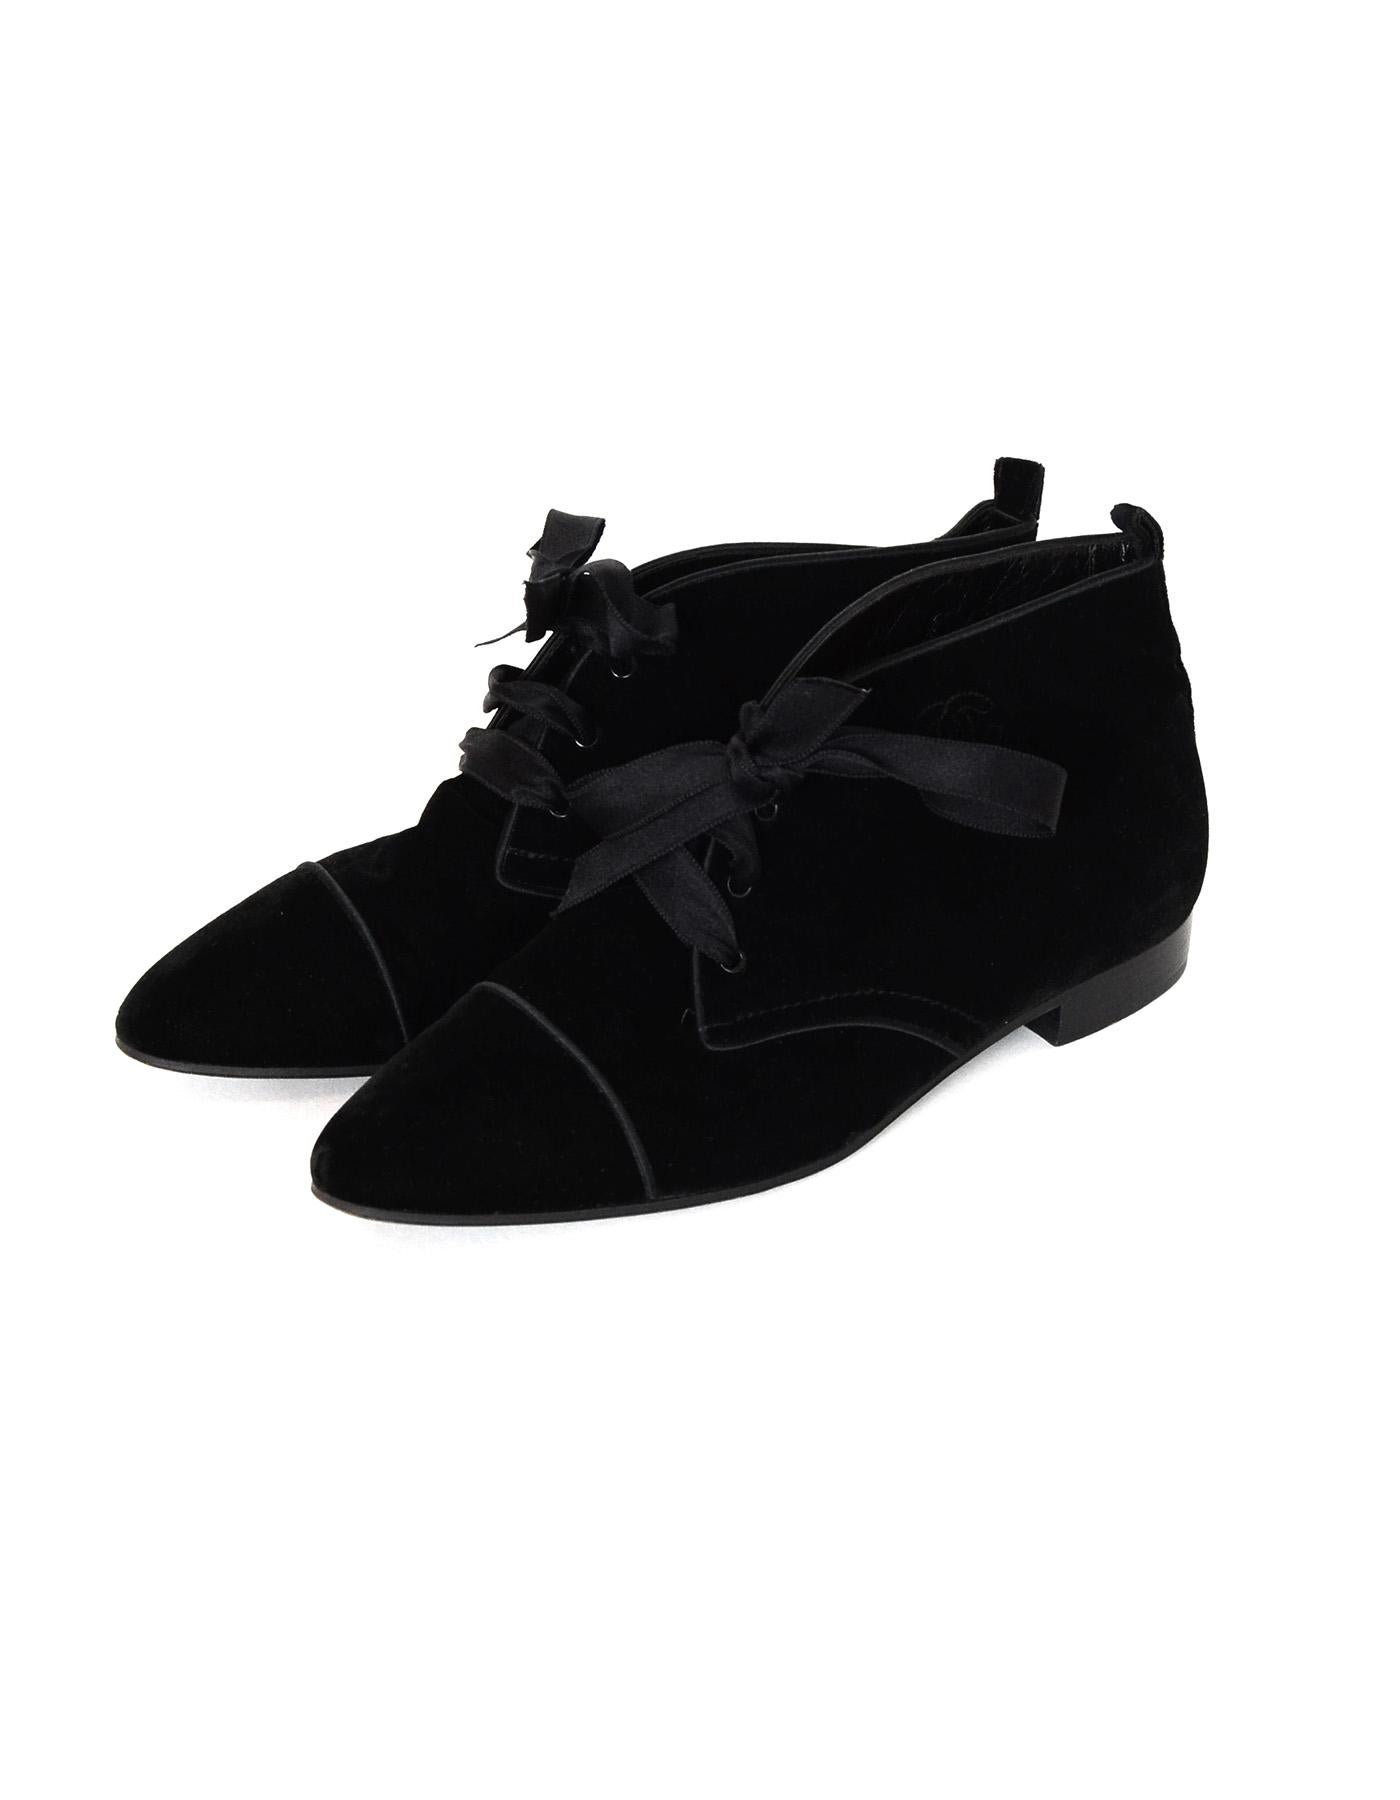 Chanel Black Velvet Lace Up Ankle Booties With Embroidered CC On The Side Sz 40.5

Made In: Italy
Color: Black
Materials: Velvet
Closure/Opening: Lace up
Overall Condition: Excellent pre-owned condition, minimal wear on soles and in